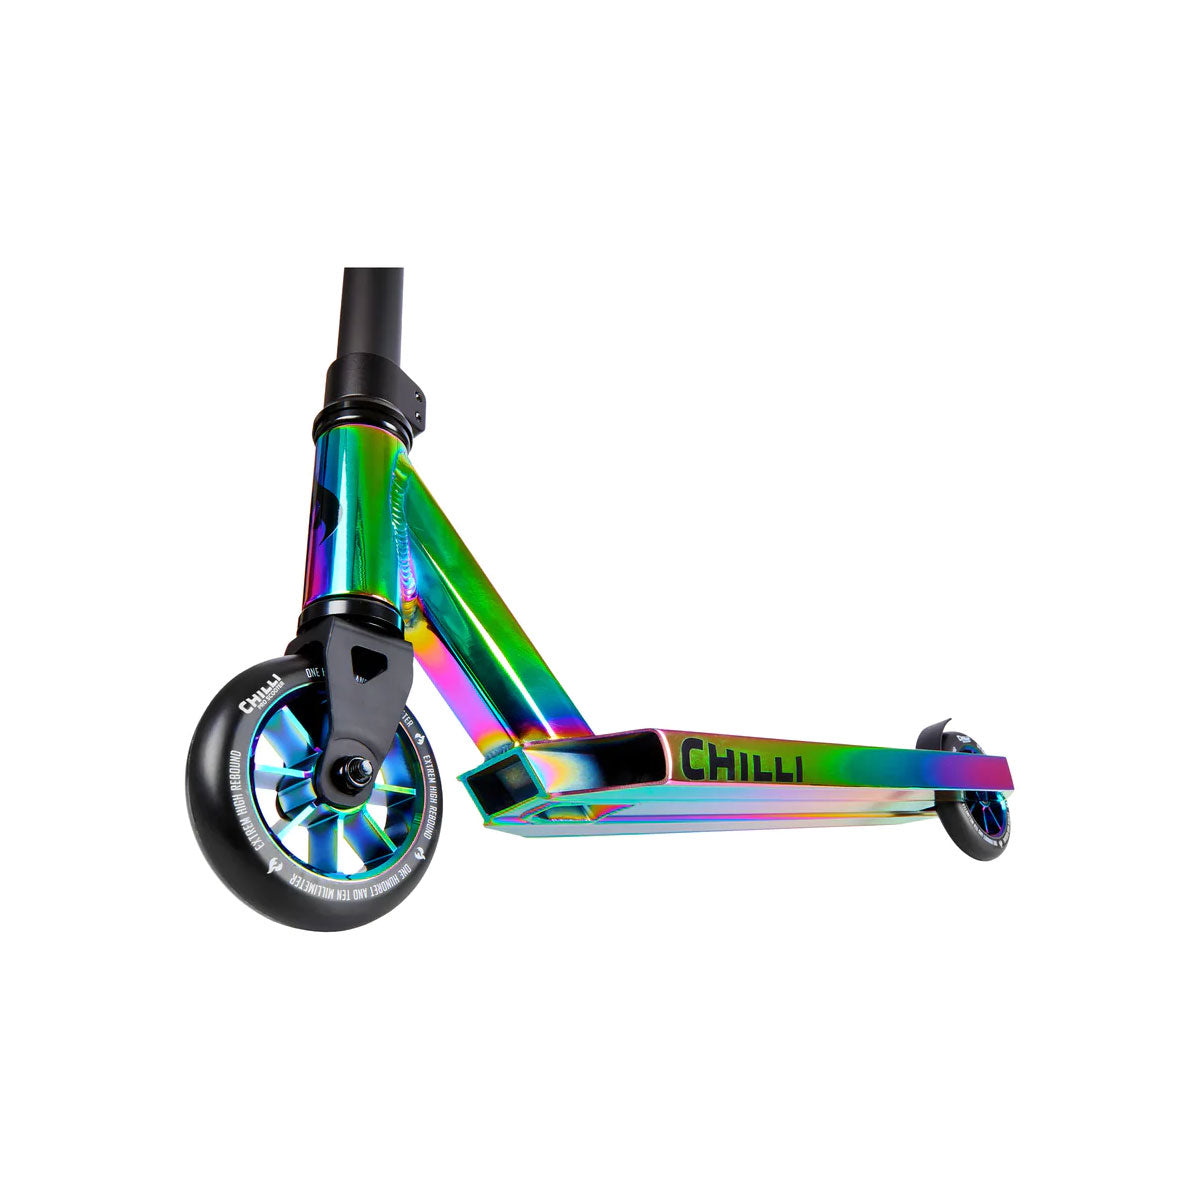 Chilli Pro Stunt Scooter - Rocky – Happy Up Inc Toys & Games